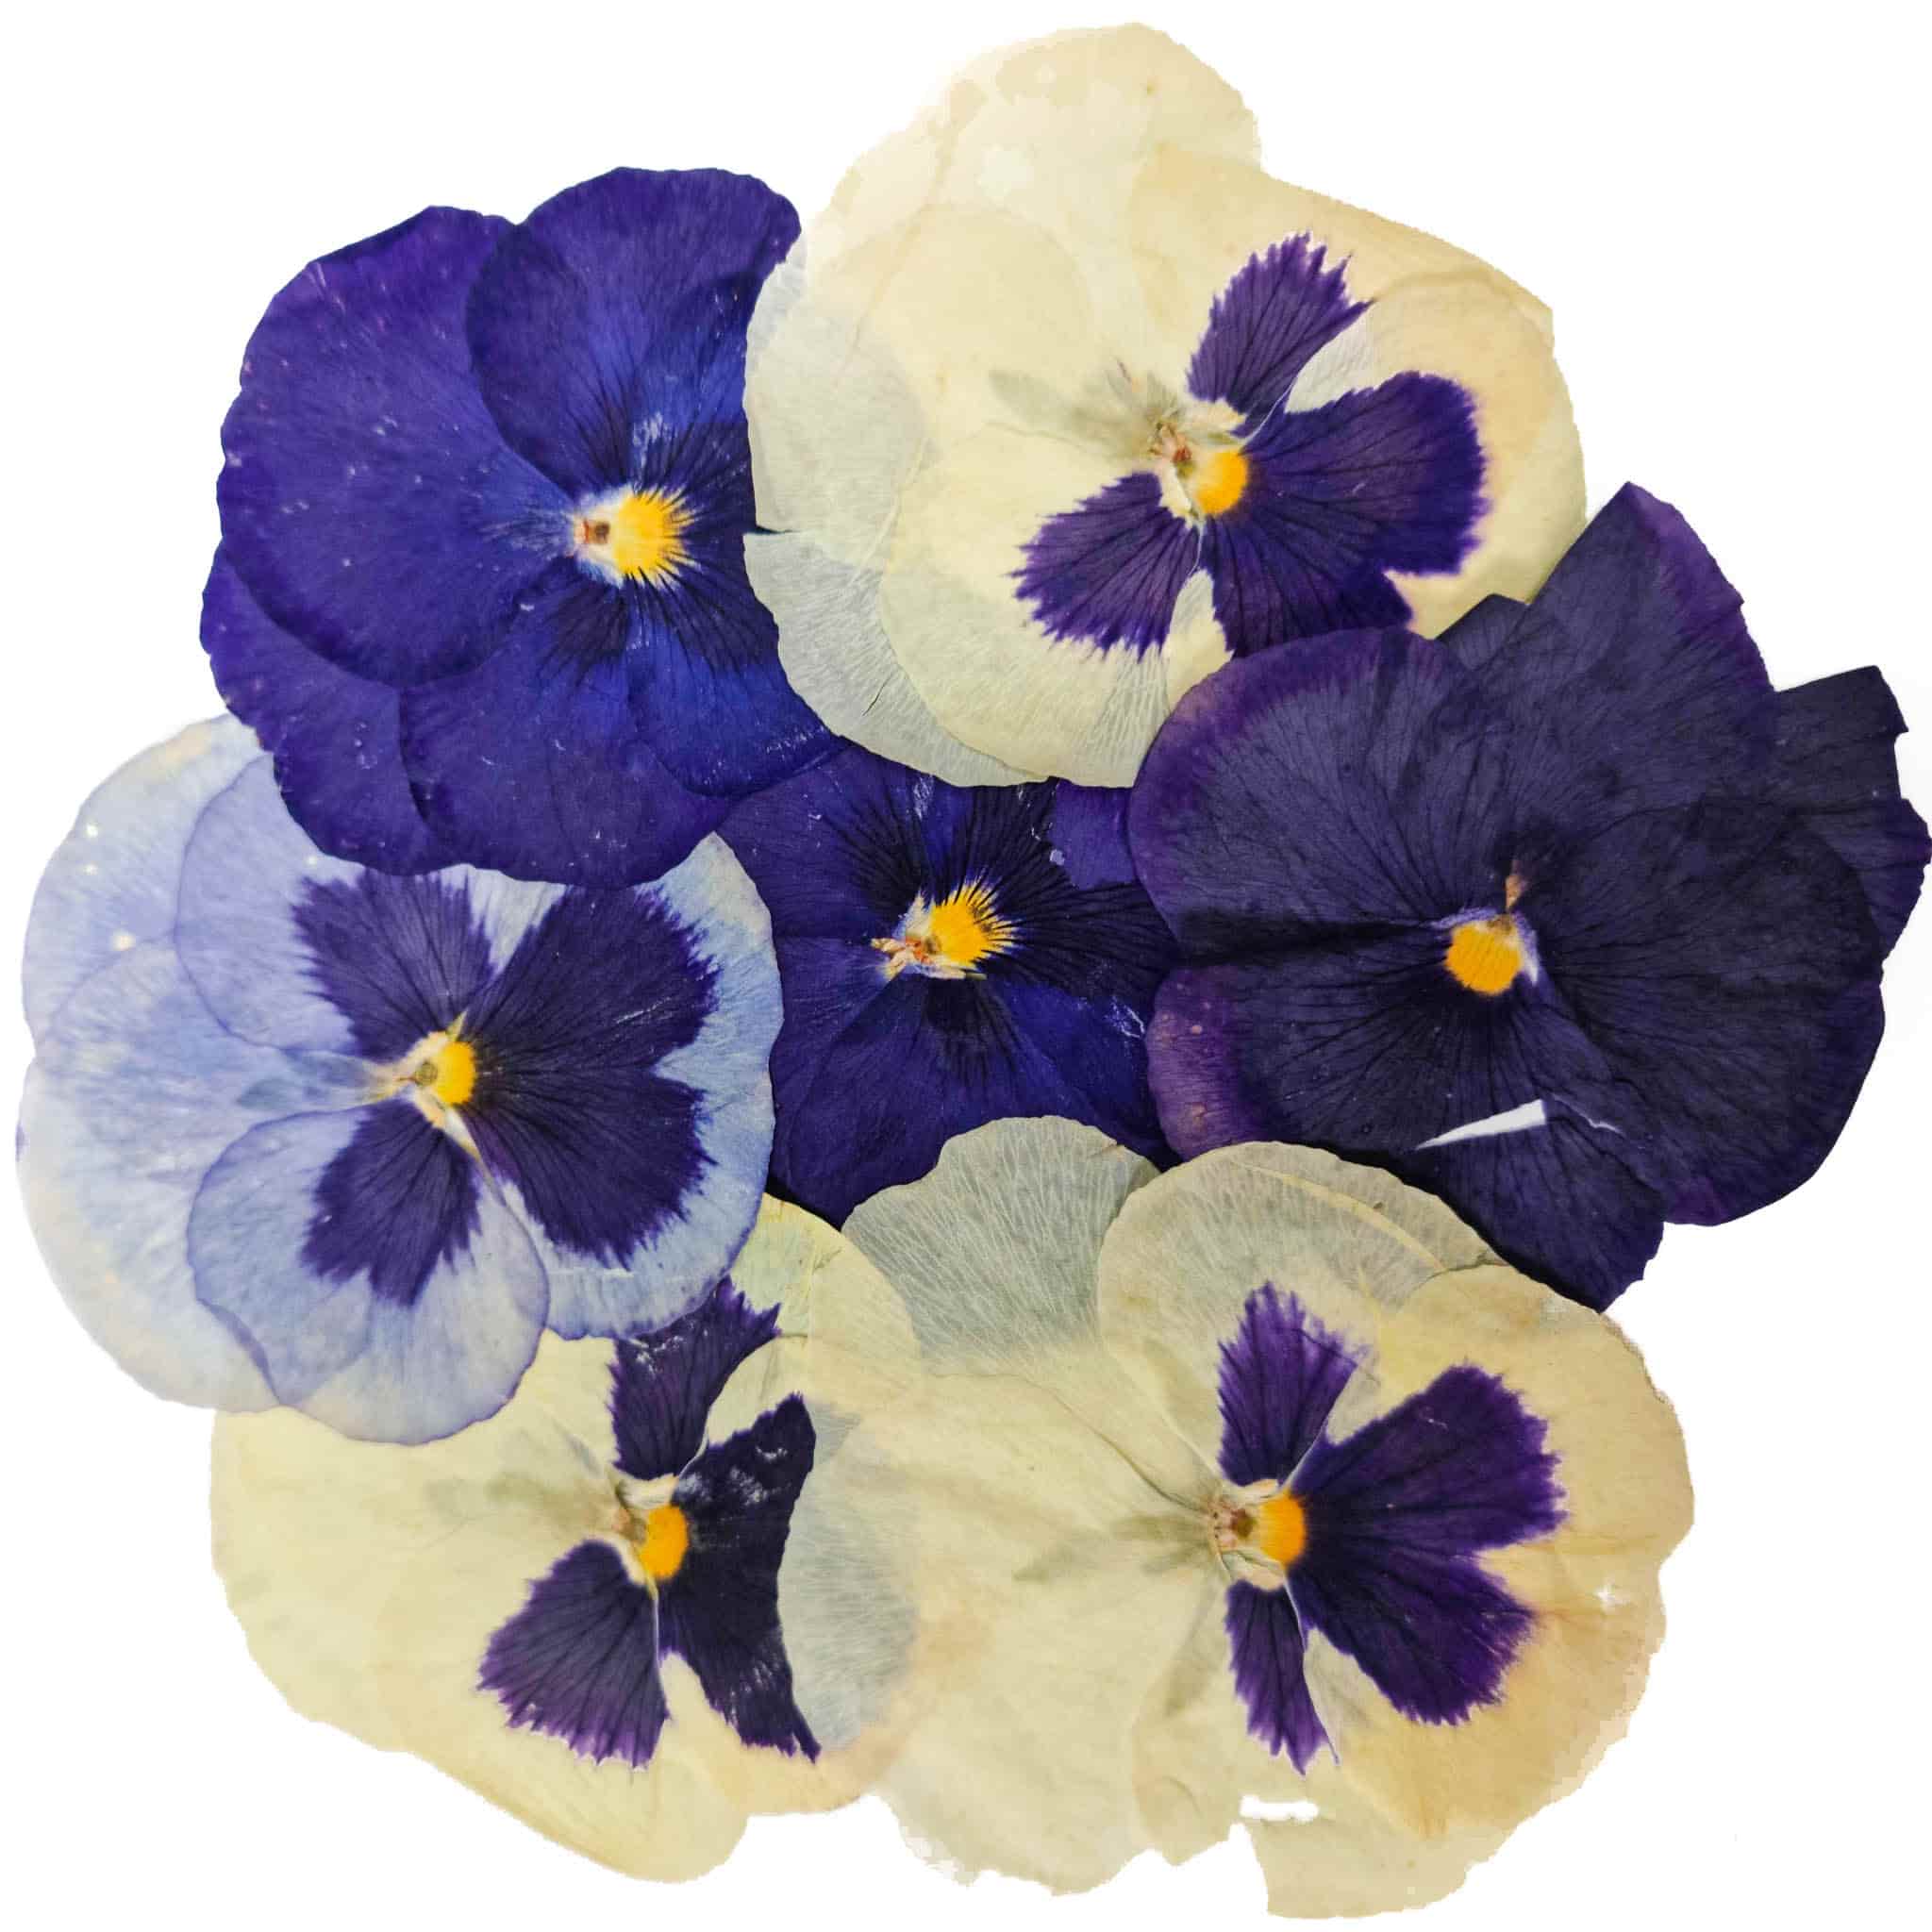 Edible Dried & Pressed Giant Pansies, 8 pieces